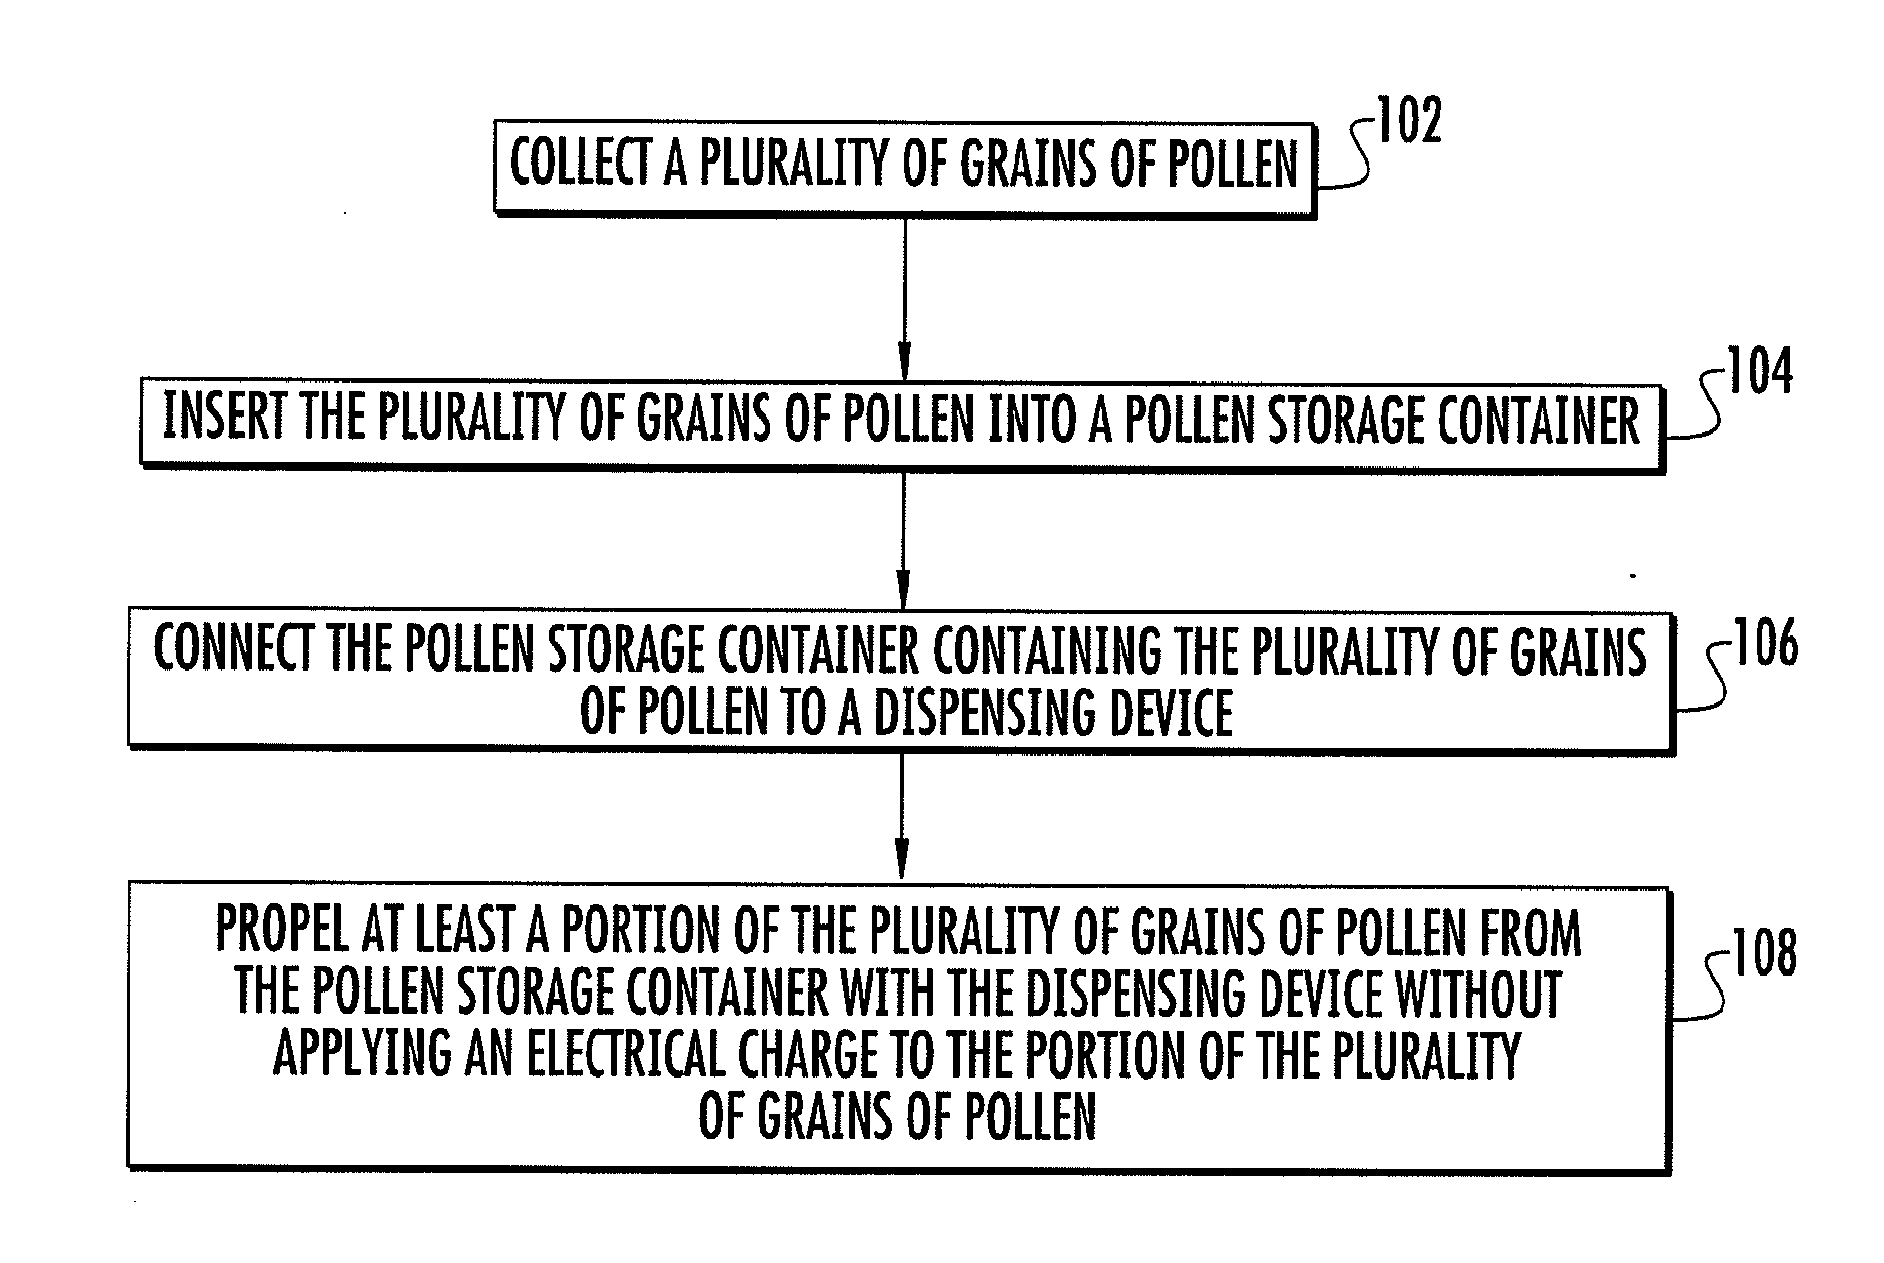 Apparatus and Method for Dispensing Grains of Pollen